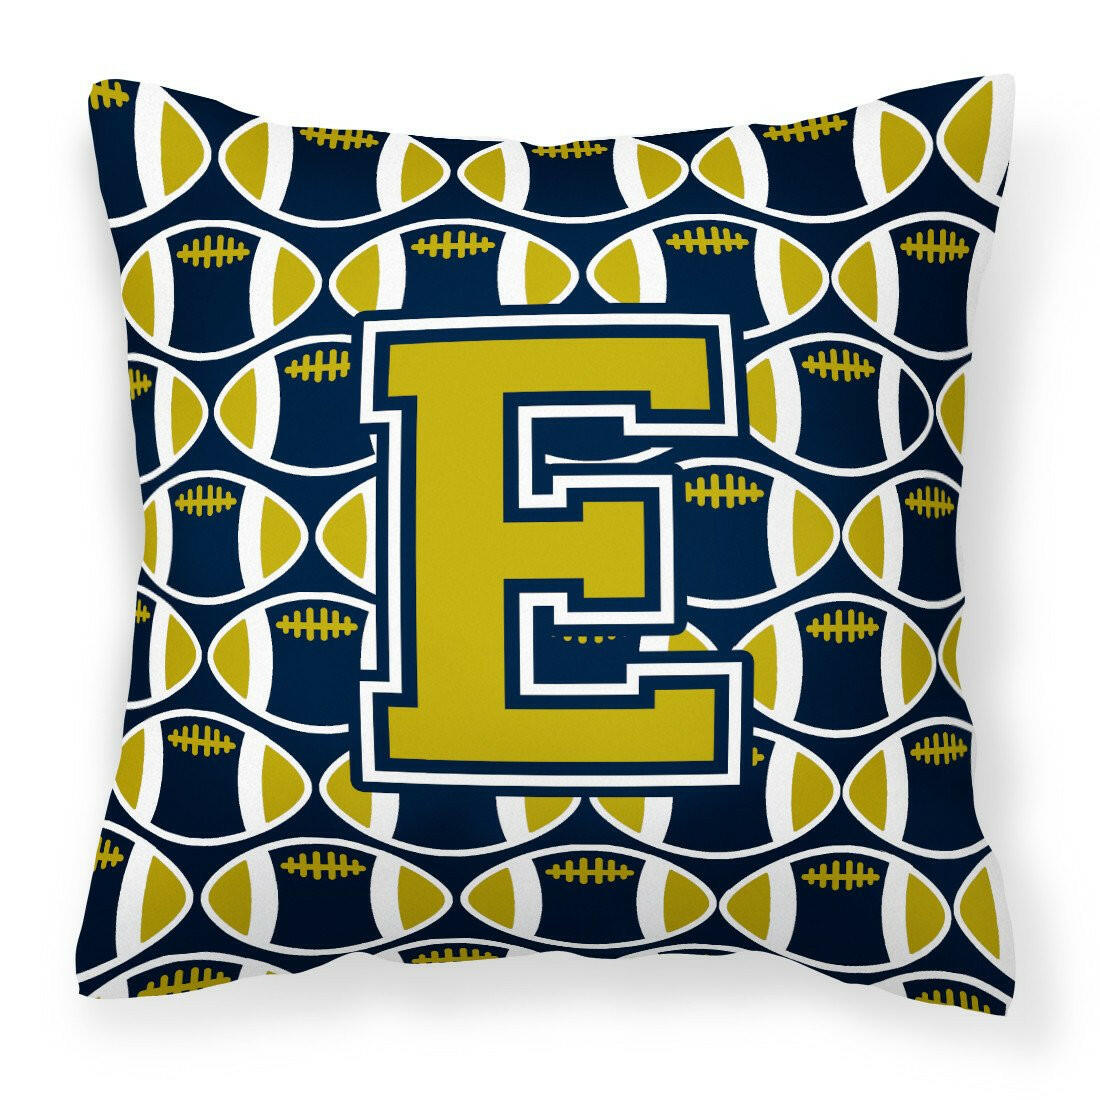 Letter E Football Blue and Gold Fabric Decorative Pillow CJ1074-EPW1414 by Caroline's Treasures